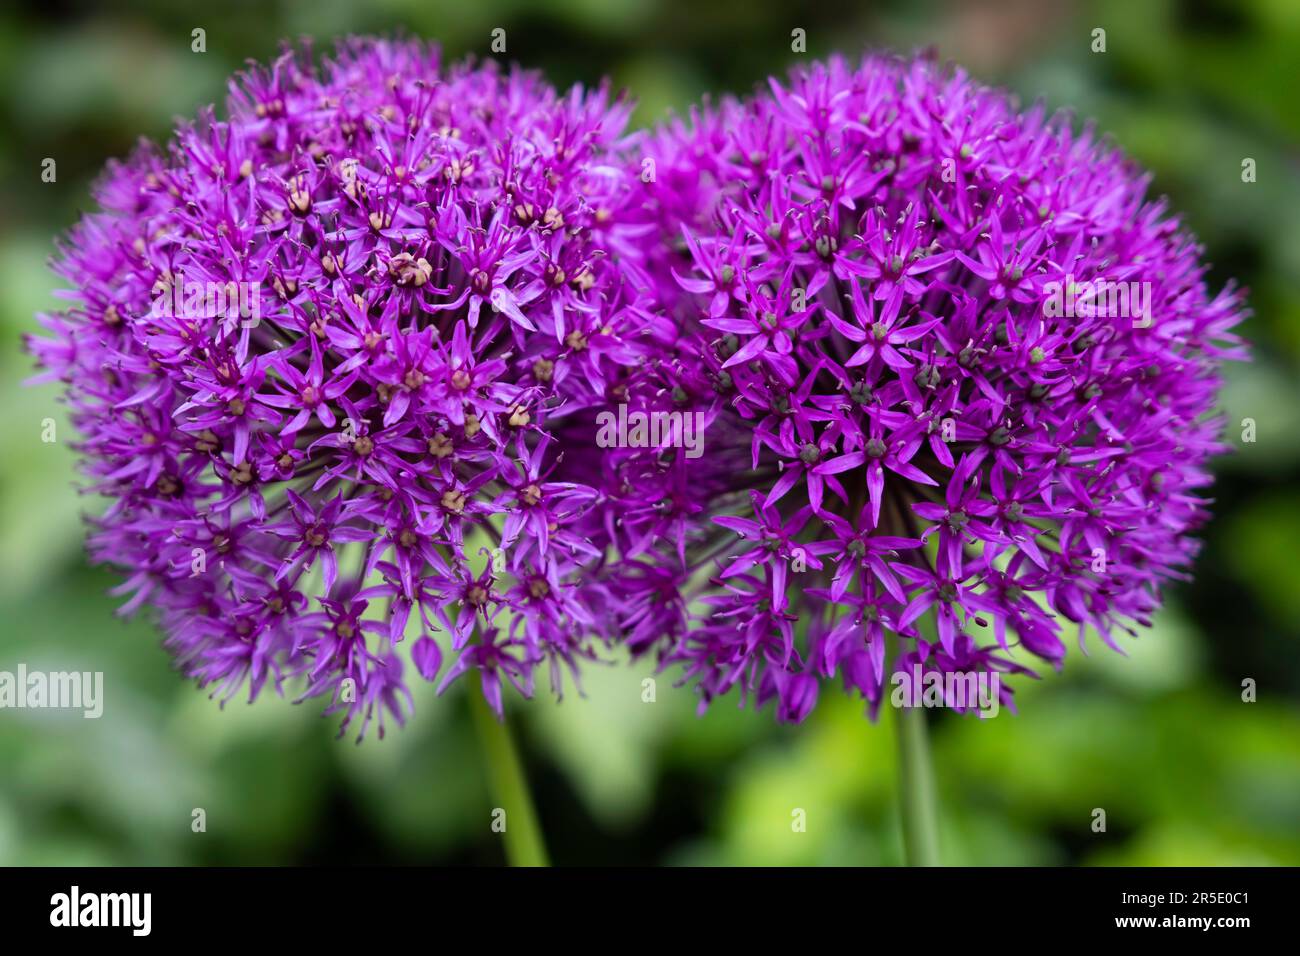 Two purple Allium flowers fused together on green blurred background. Ornamental onion background Stock Photo